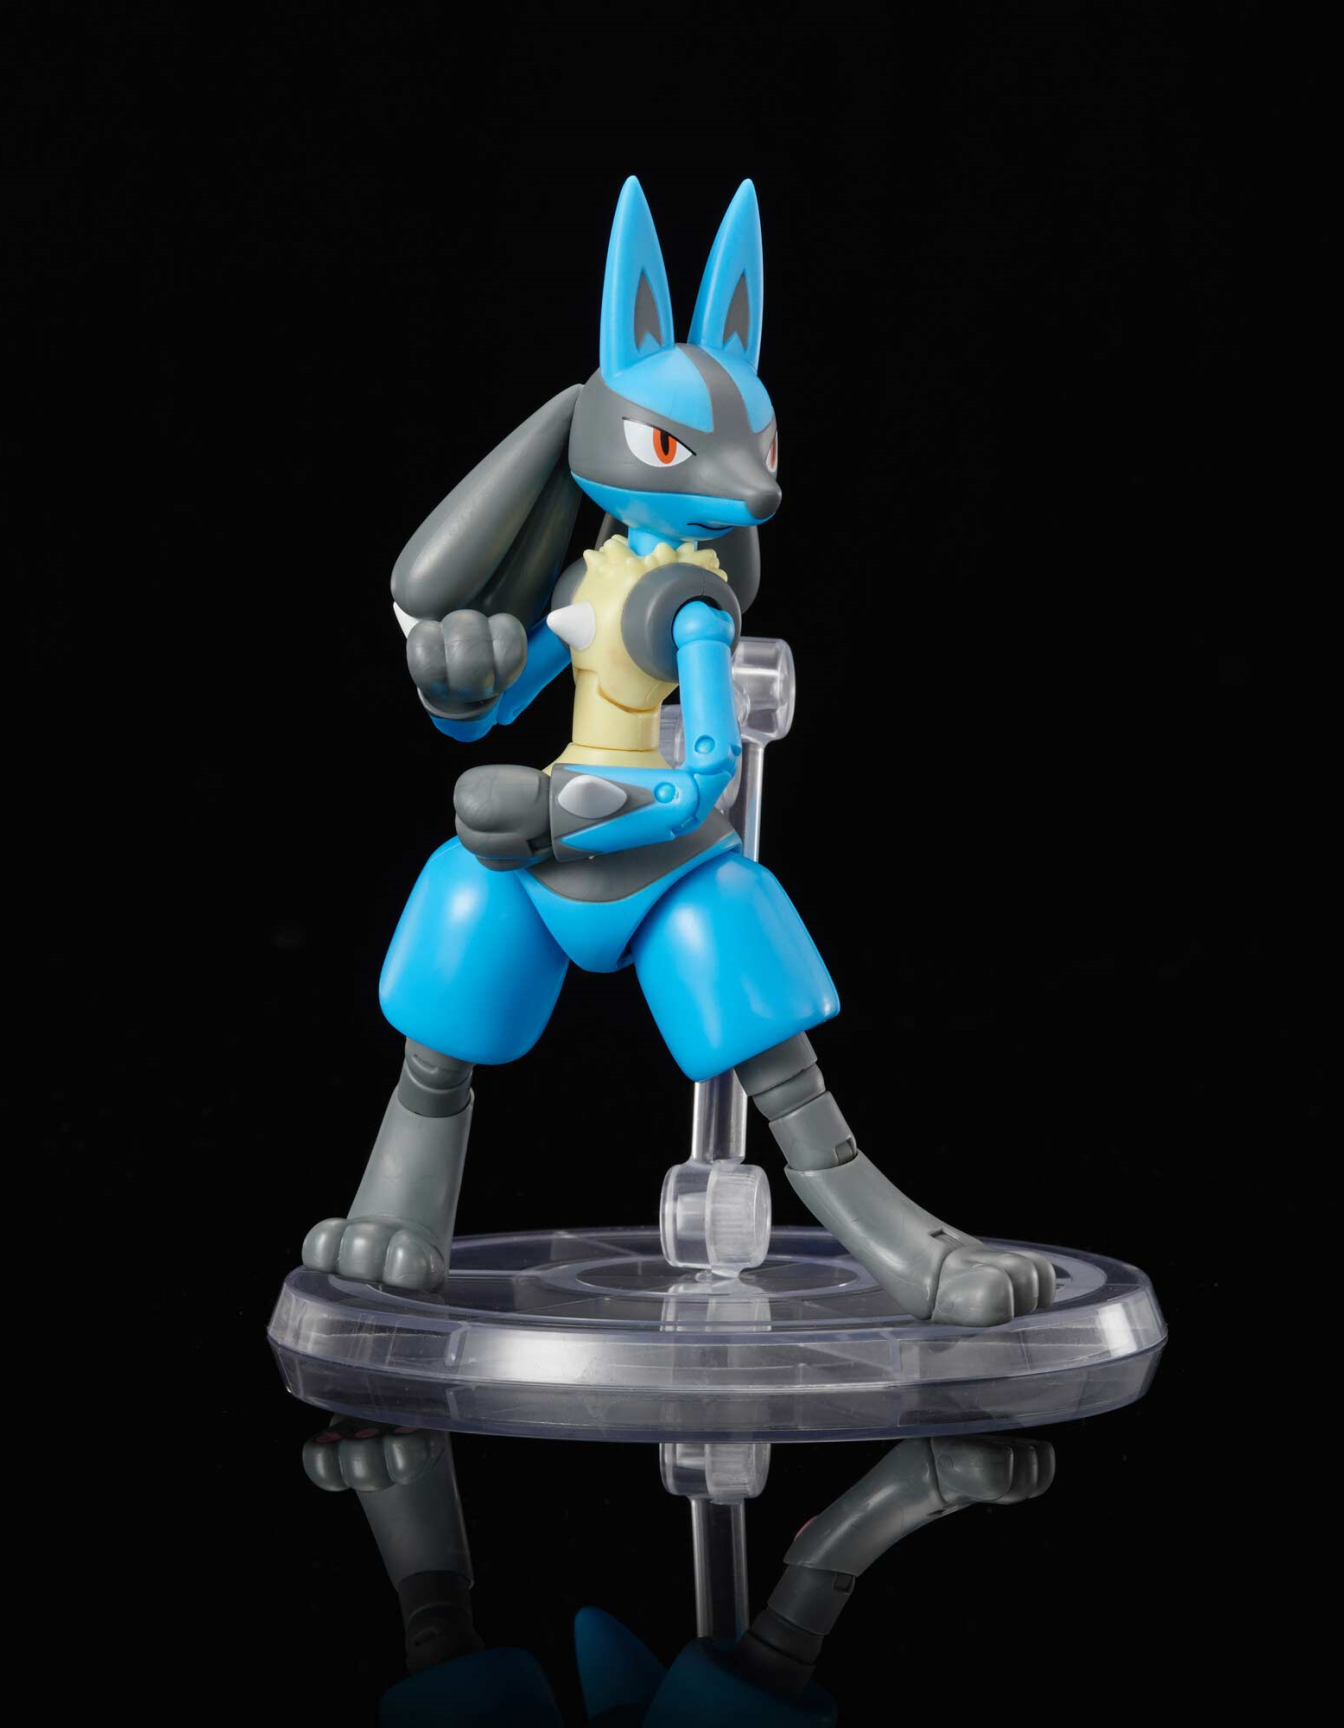 Pokémon Select Super Articulated Figure - Lucario | North of Exile Games